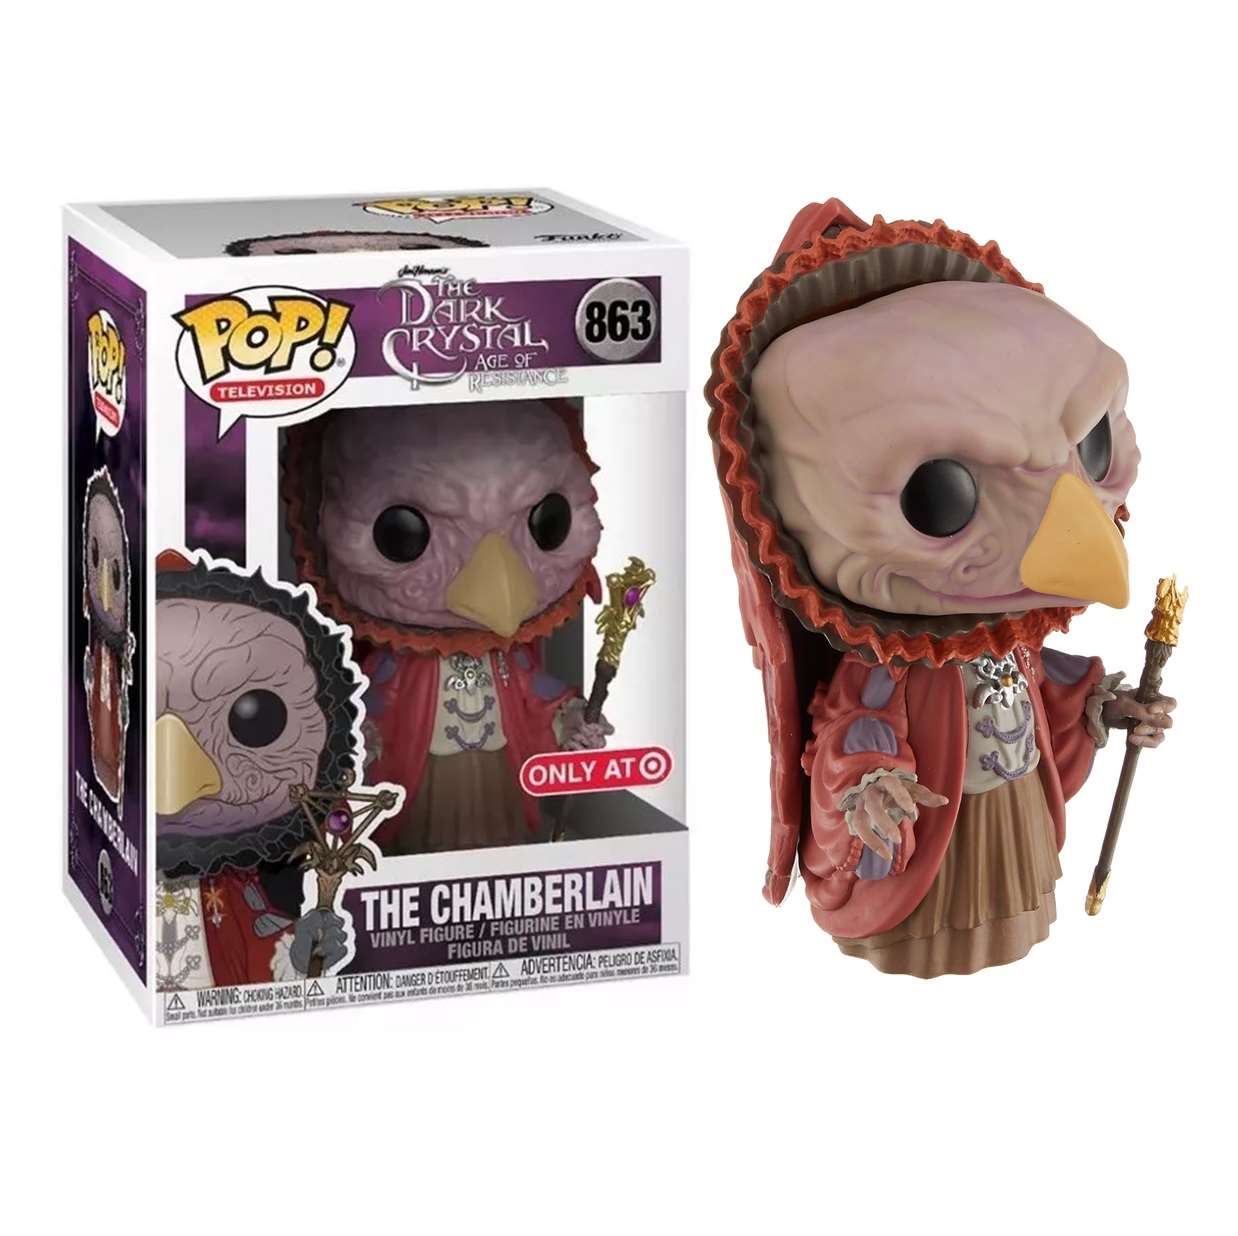 The Chamberlain #863 Funko Pop! The Dark Crystal Only Target